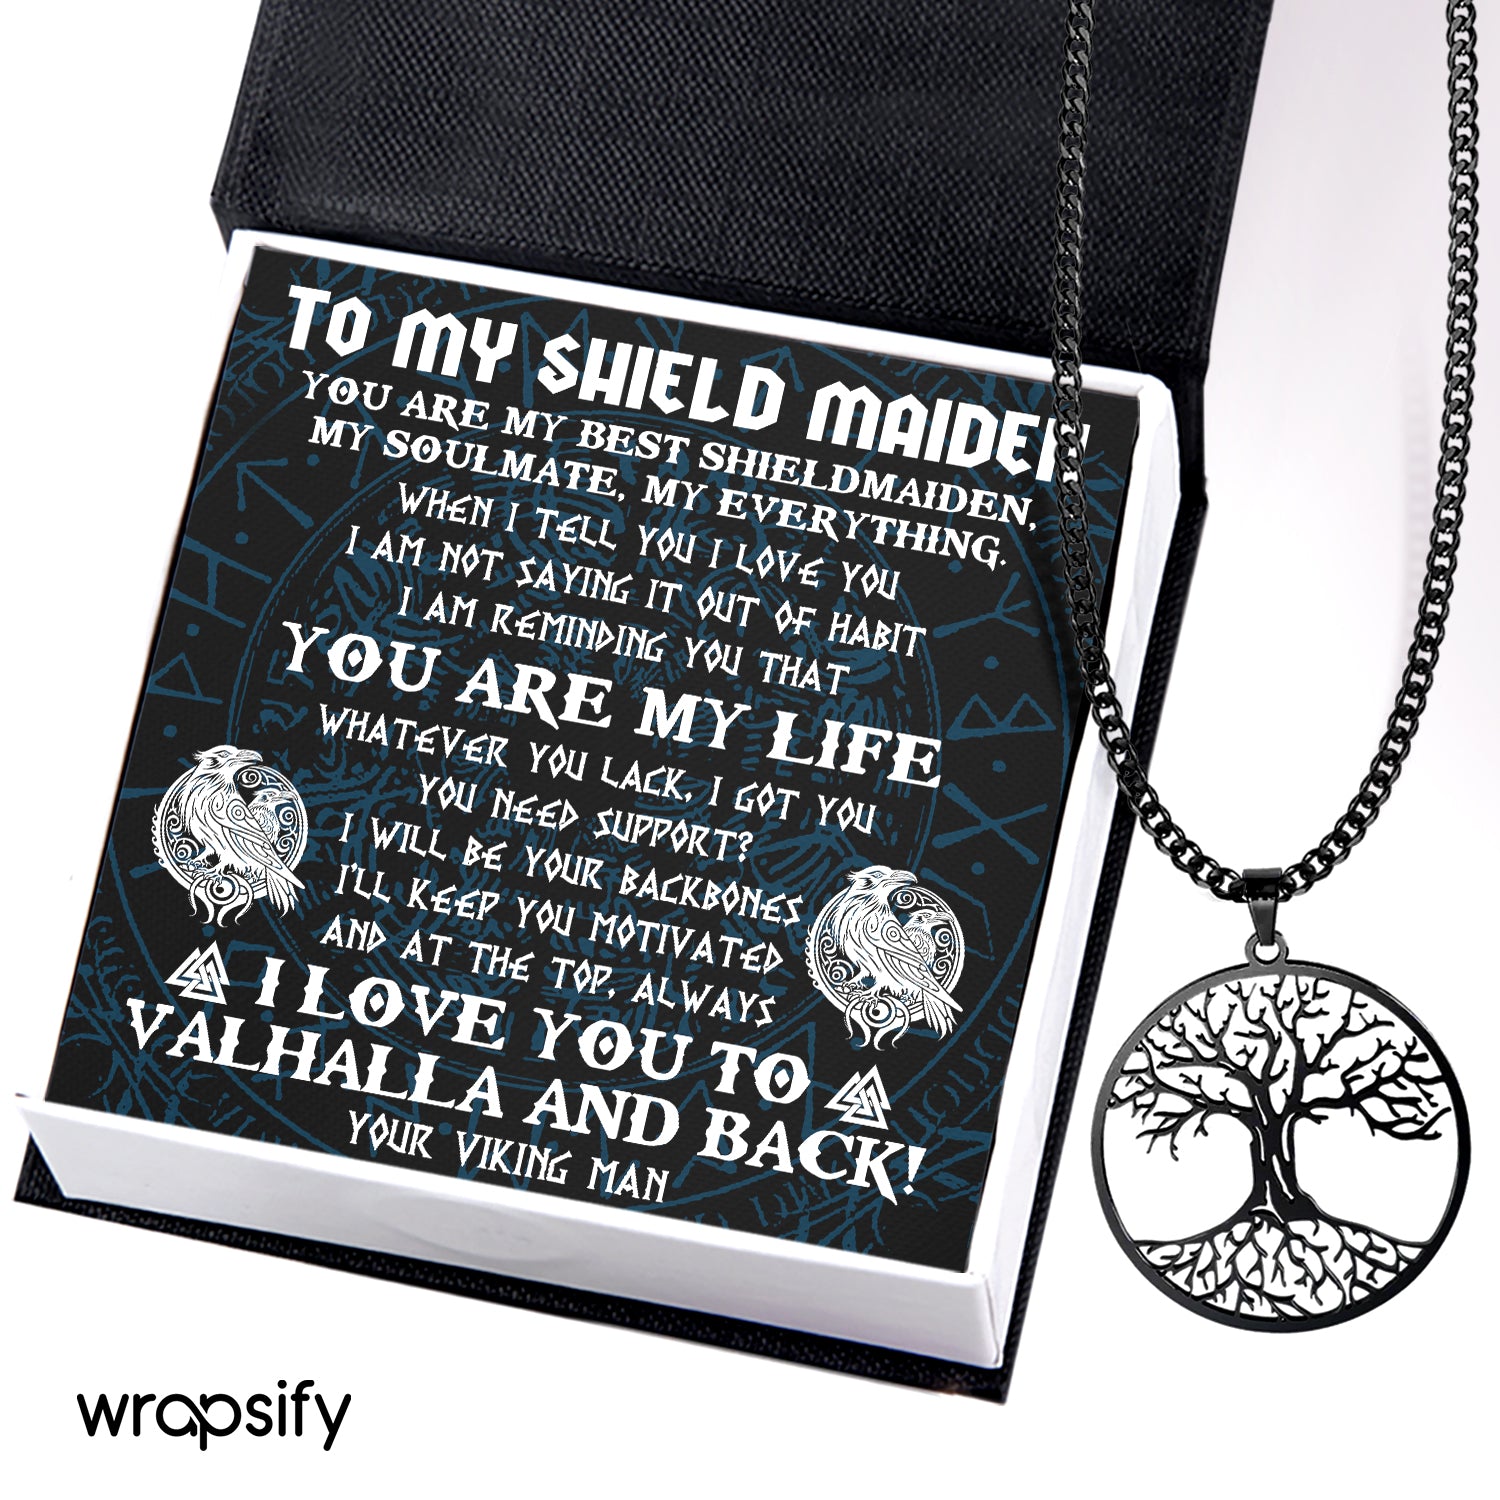 Tree Of Life Necklace - Viking - To My Shield Maiden - You Are My Life - Gnyb13001